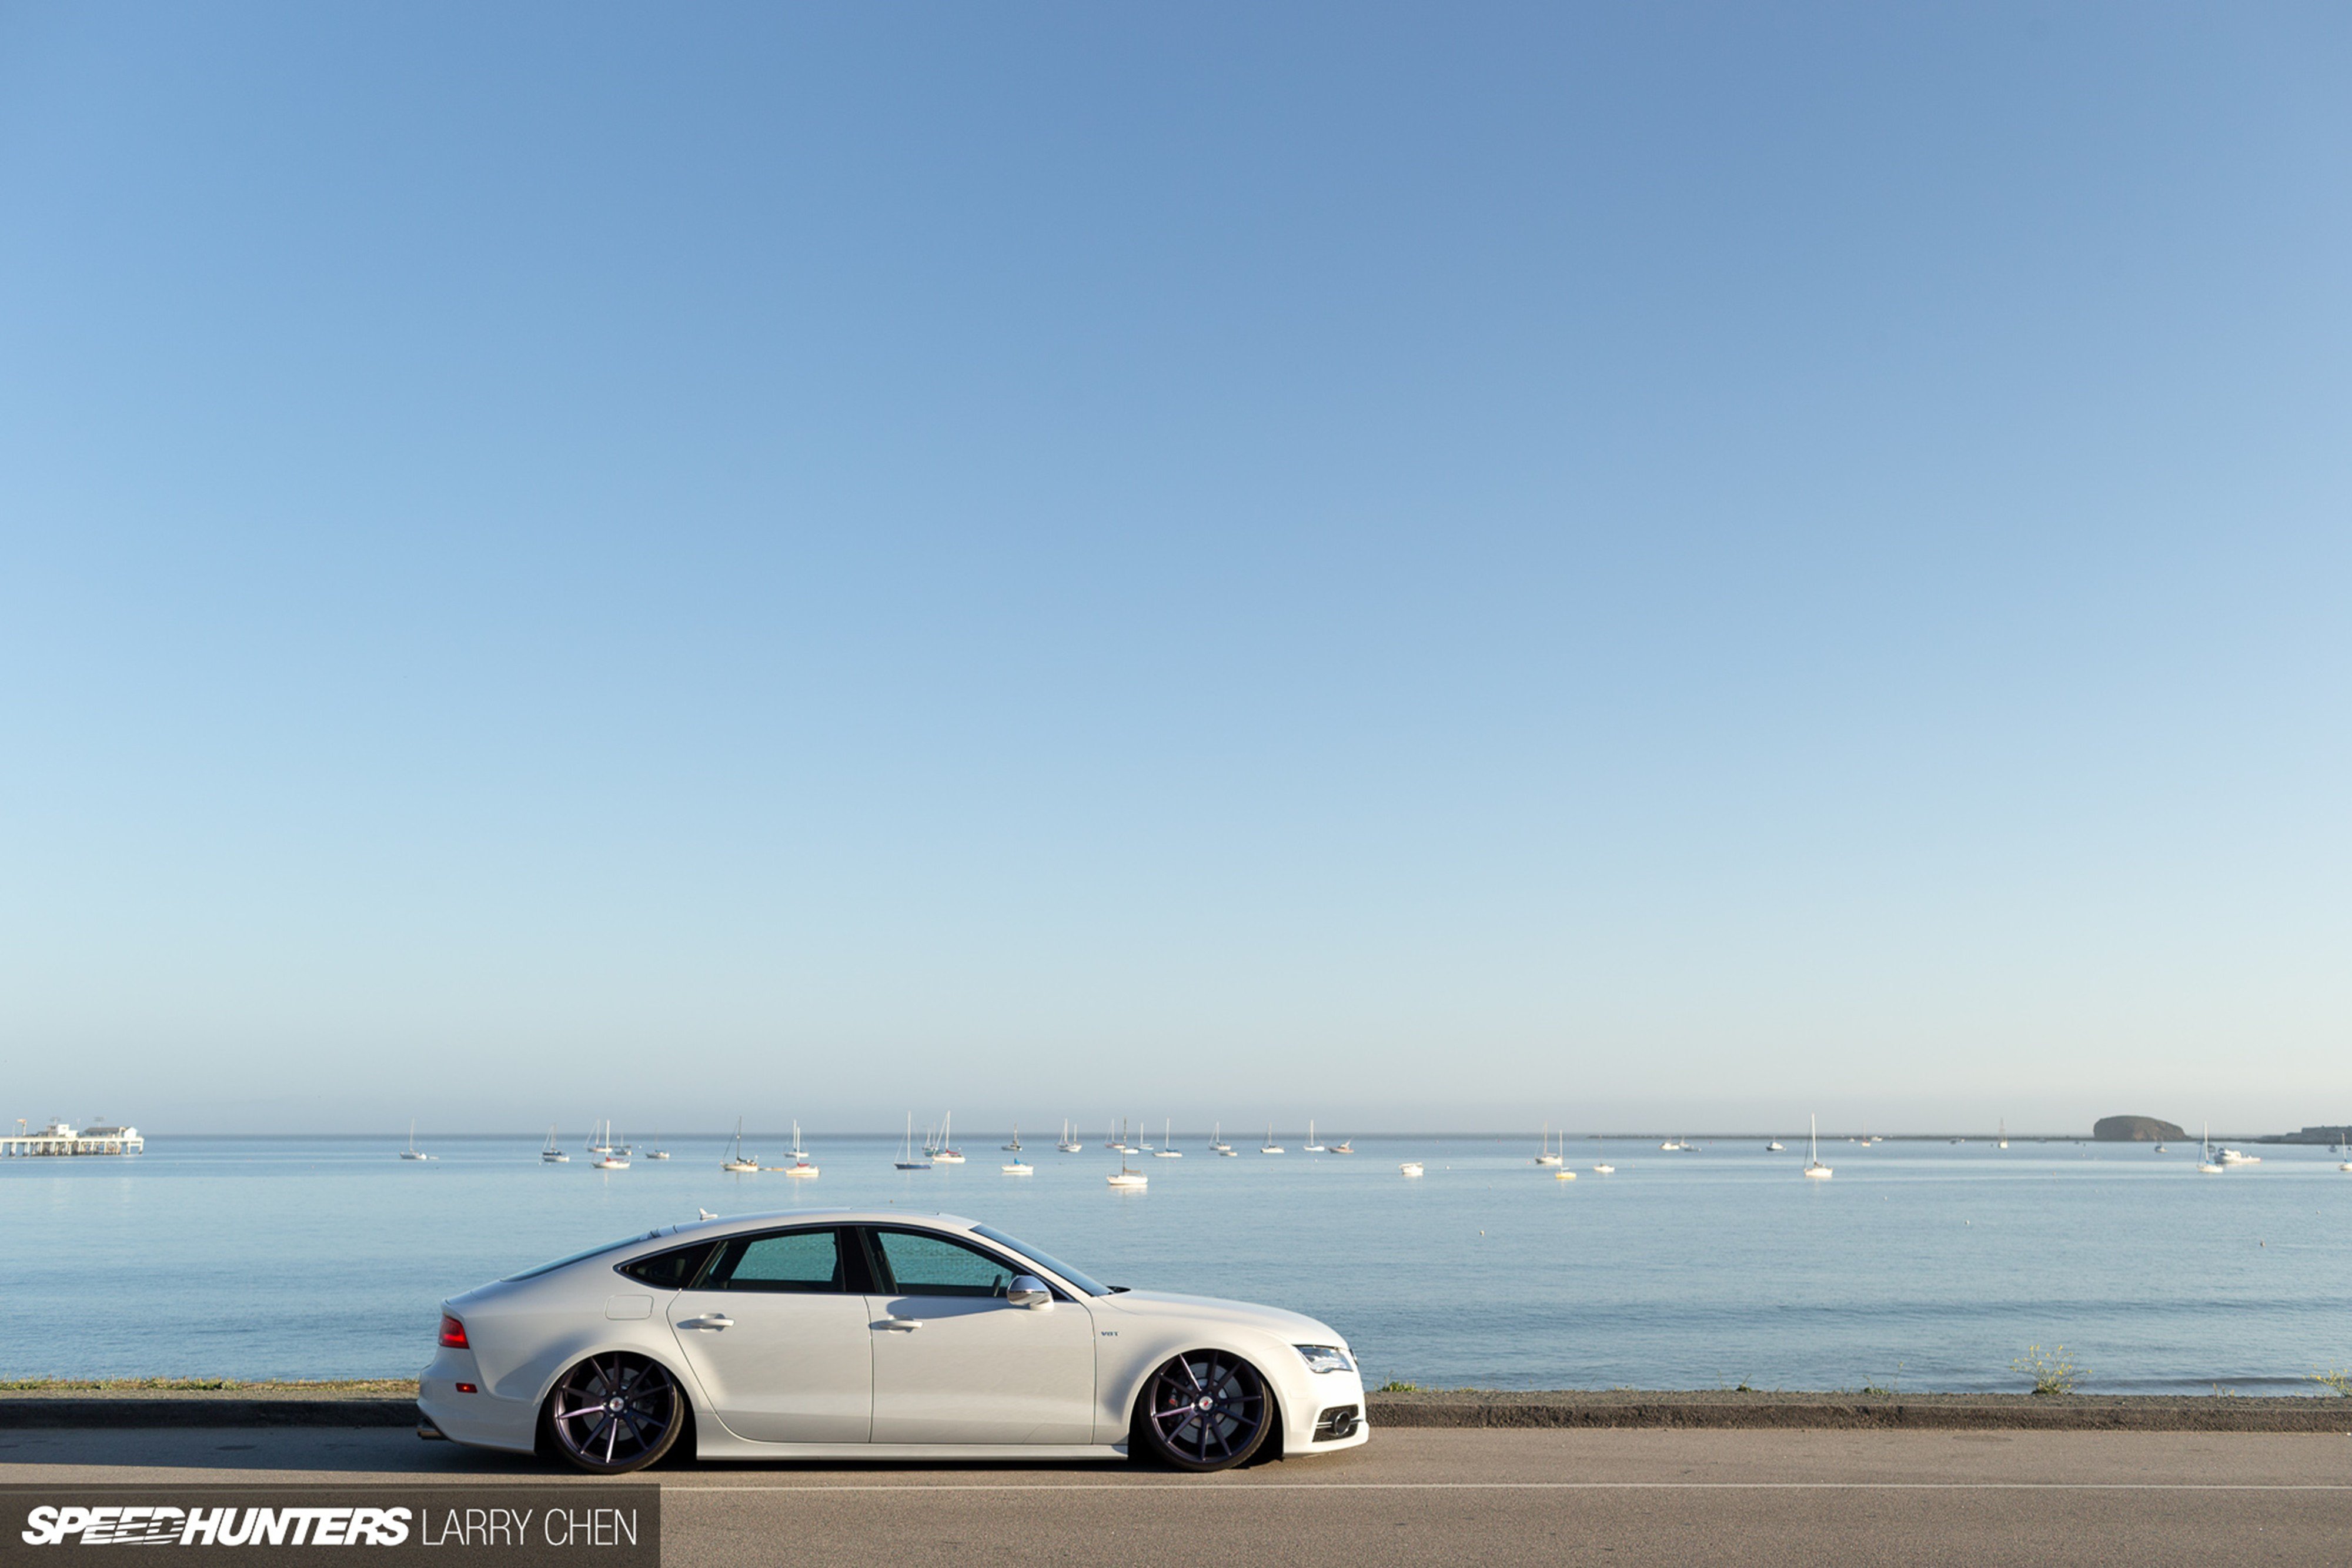 speed, Hunters, Accuair, Audi s7, Vossen, Car, Tunning, Supercar, Germany, 4000x2667 Wallpaper